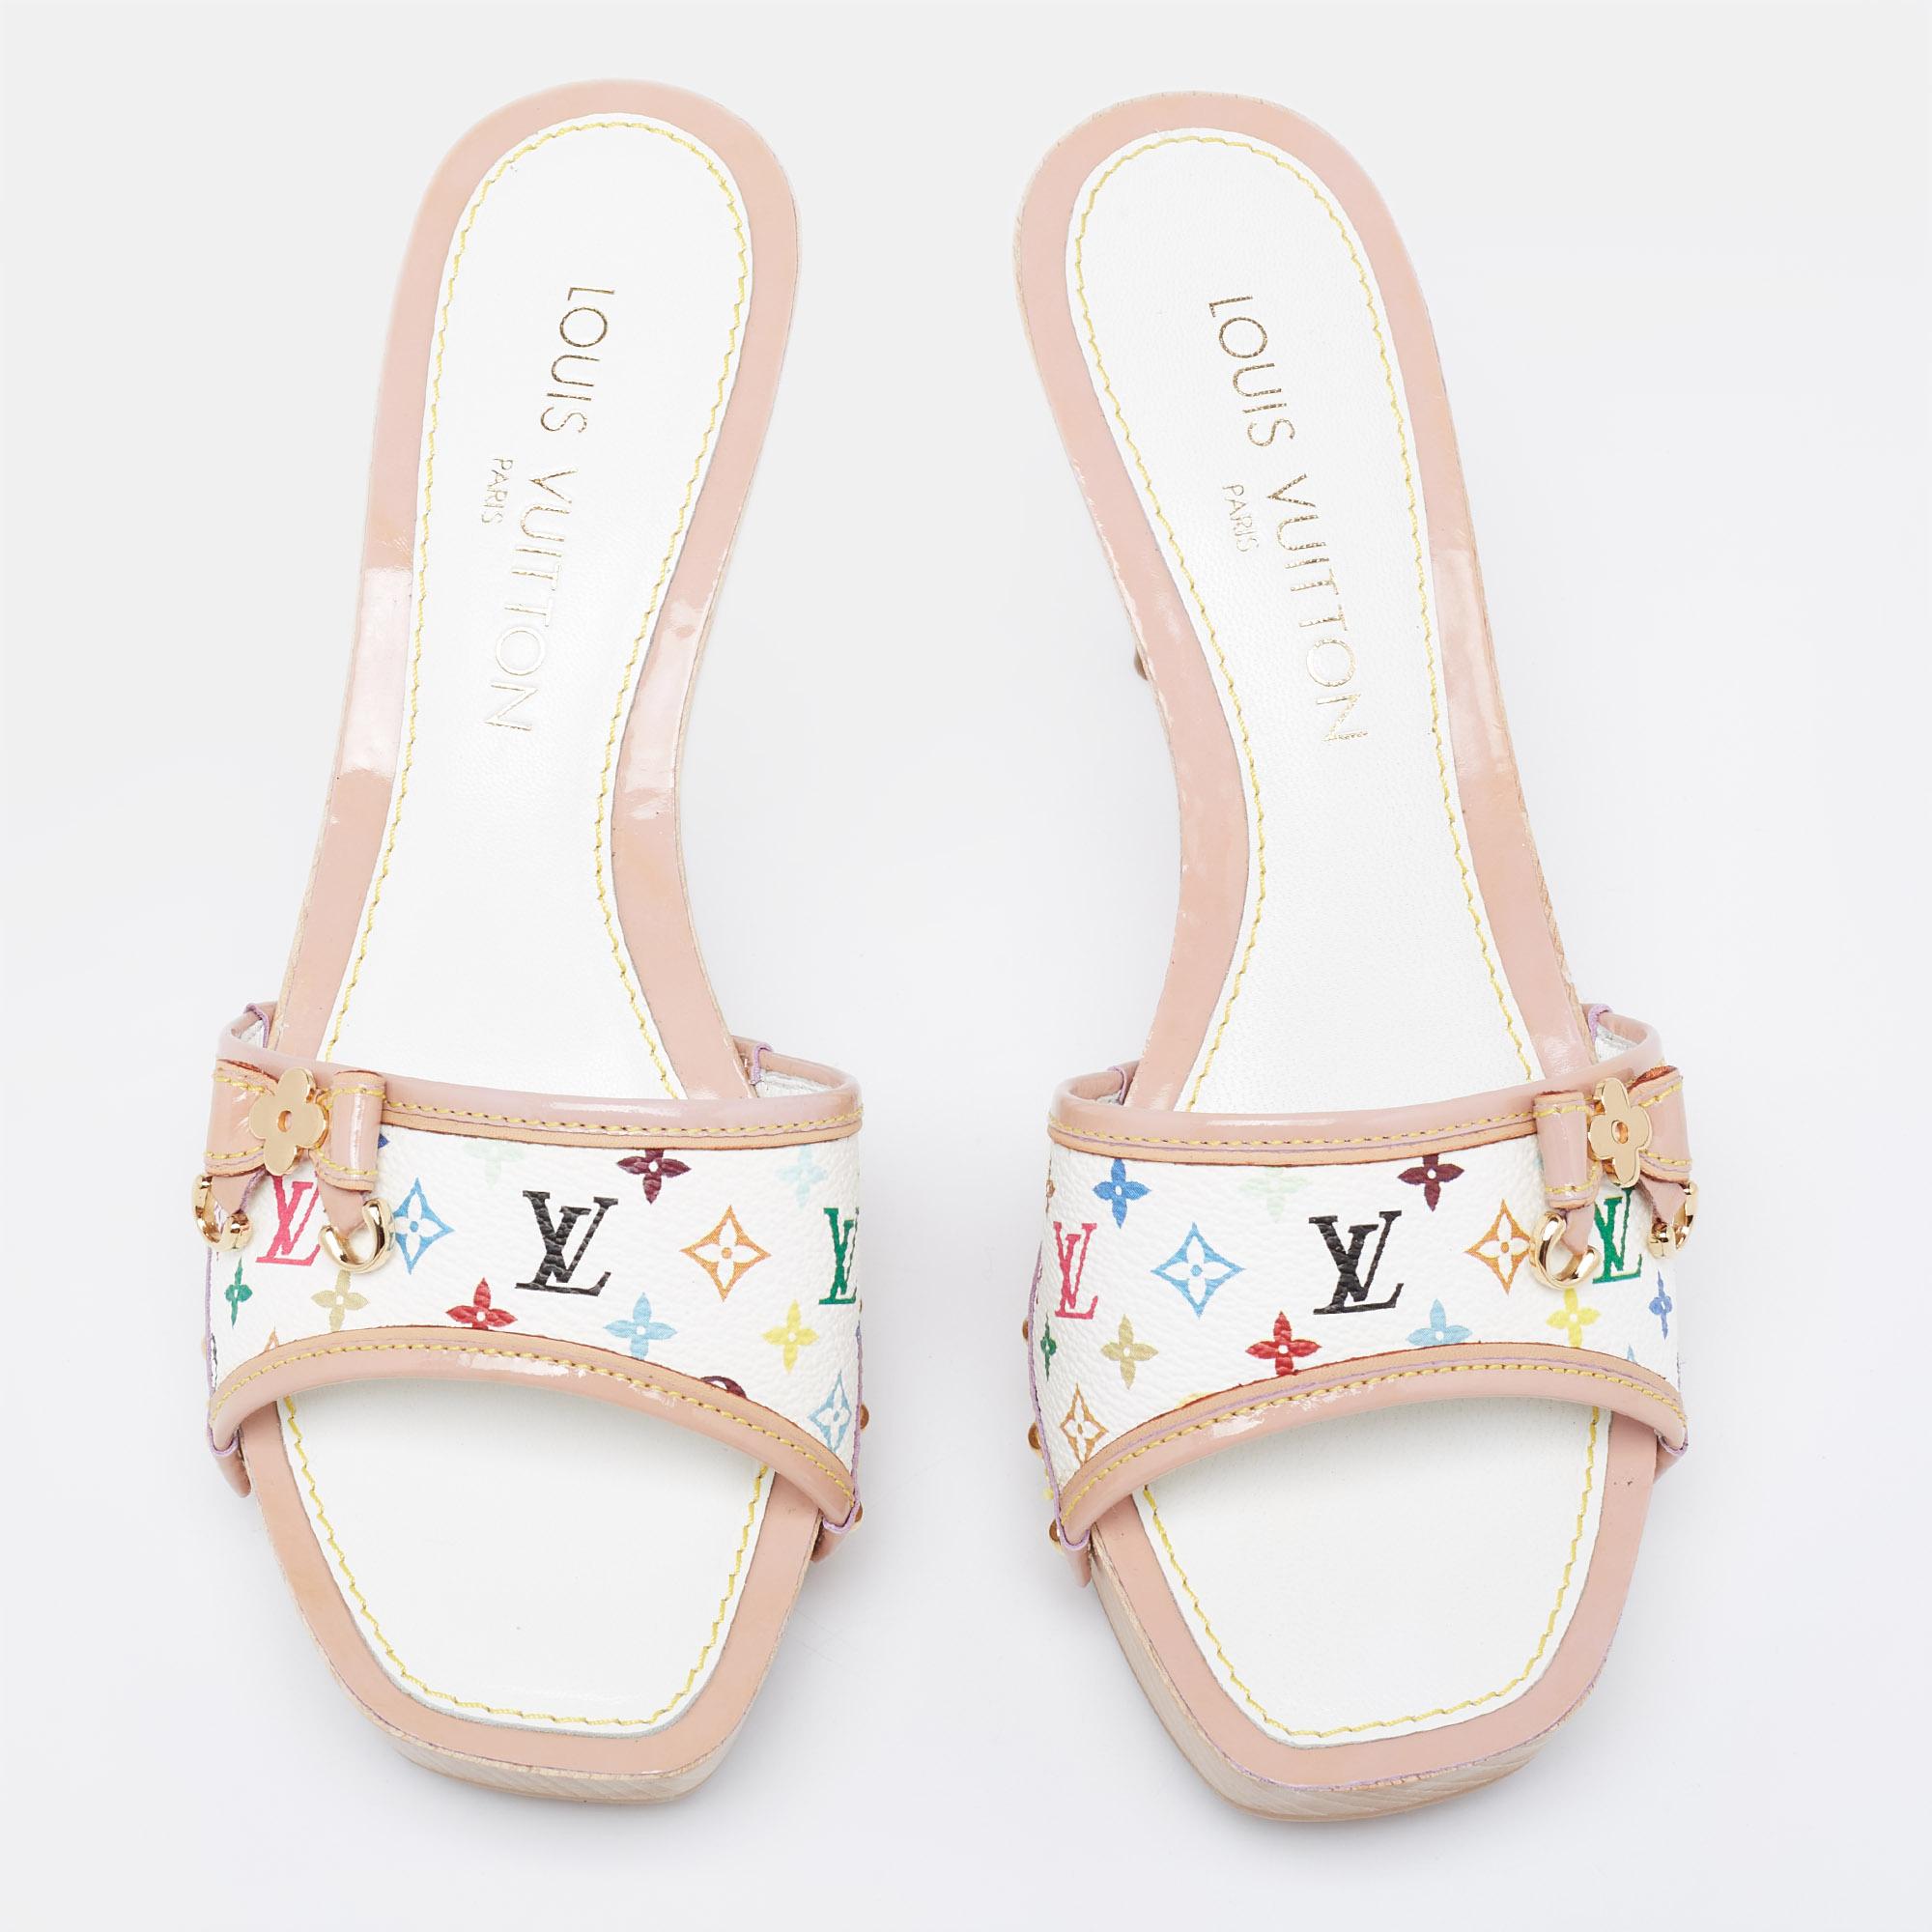 Updated with exquisite details, these Louis Vuitton sandals are the epitome of sophistication. The pair is crafted from the signature Monogram canvas and patent leather, and the striking vamps are beautified with a cute bow design. The 9.5cm heels